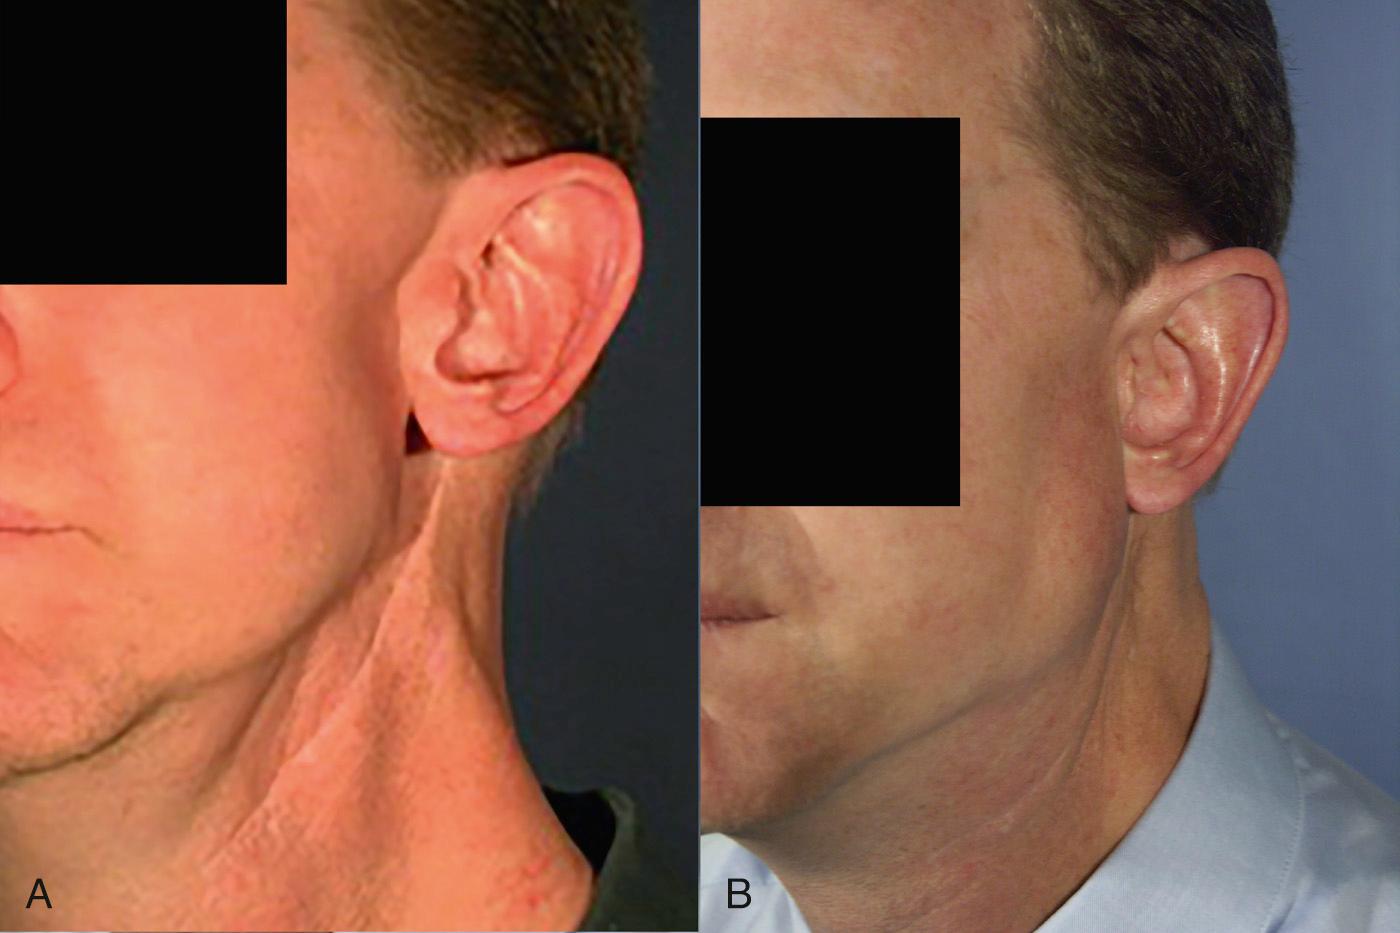 Fig. 40.1, (A) Deformity after radical parotidectomy and reconstruction by a SCM flap and facial nerve graft followed by radiotherapy. Atrophy of the SCM muscle leads to depression in the mandibular angle and in the cervical region. (B) Restoration of the facial contour after secondary reconstruction with an ALT flap.